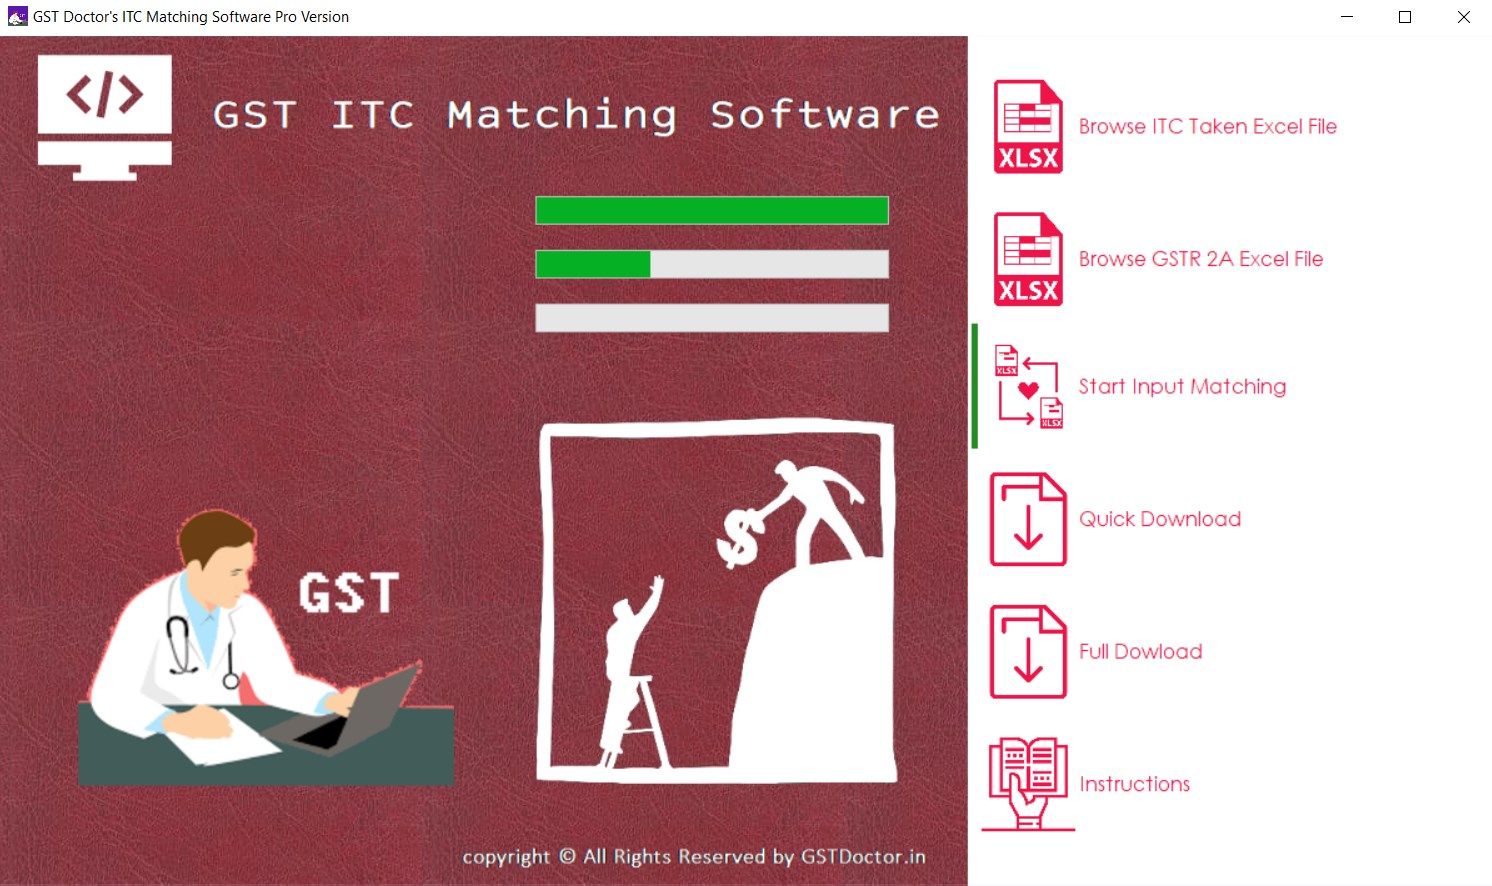 GST Doctor ITC Matching Software Pro